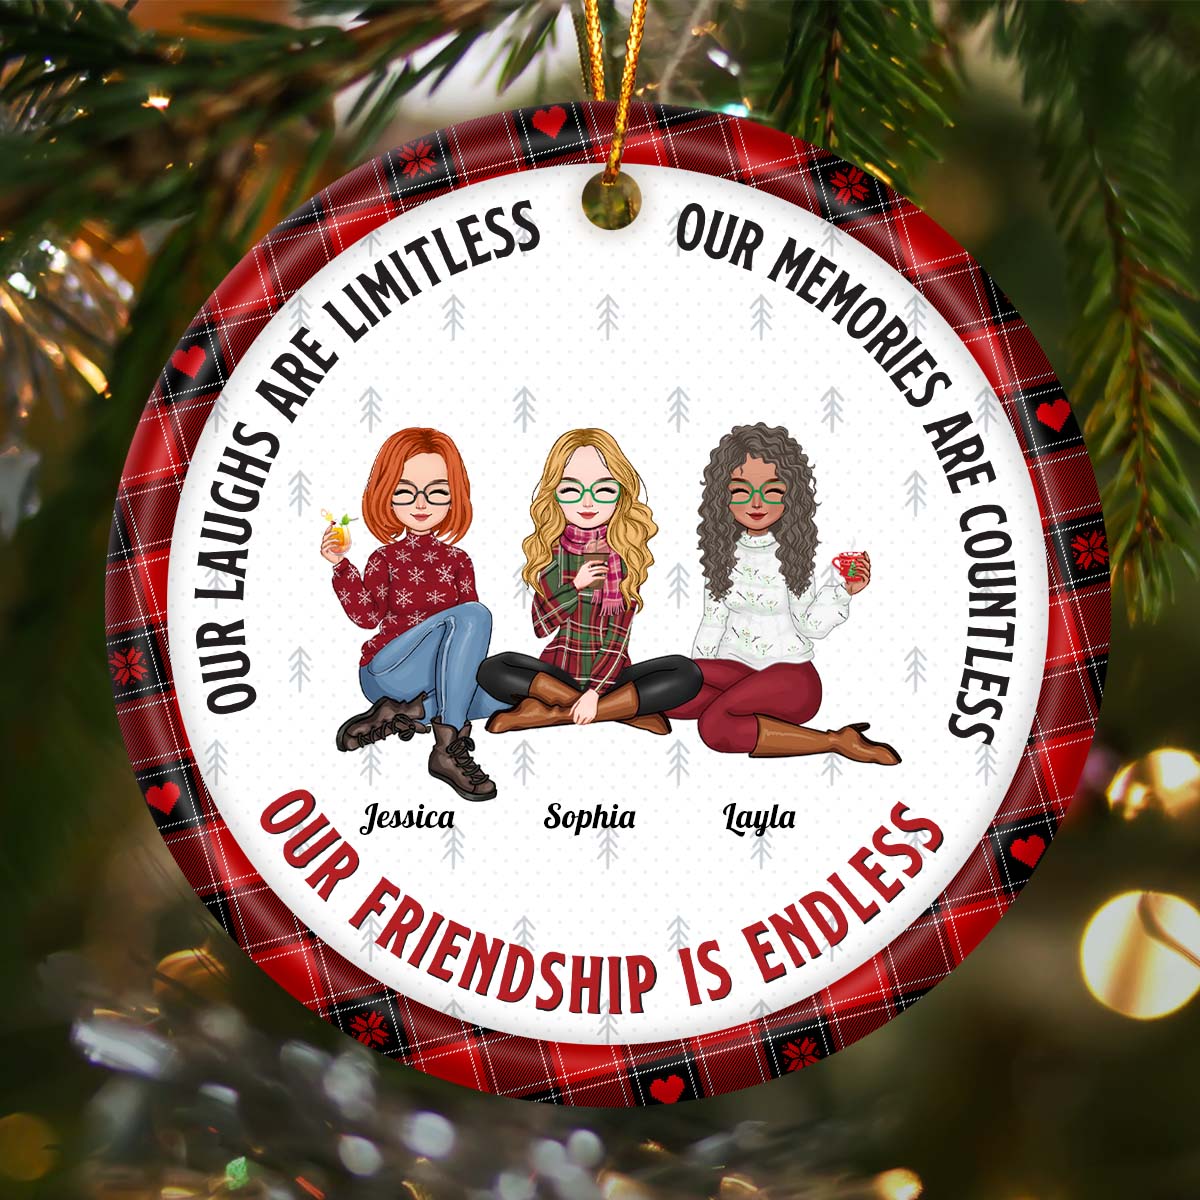 Our Friendship Is Endless Ver 2 - Personalized Ceramic Ornament